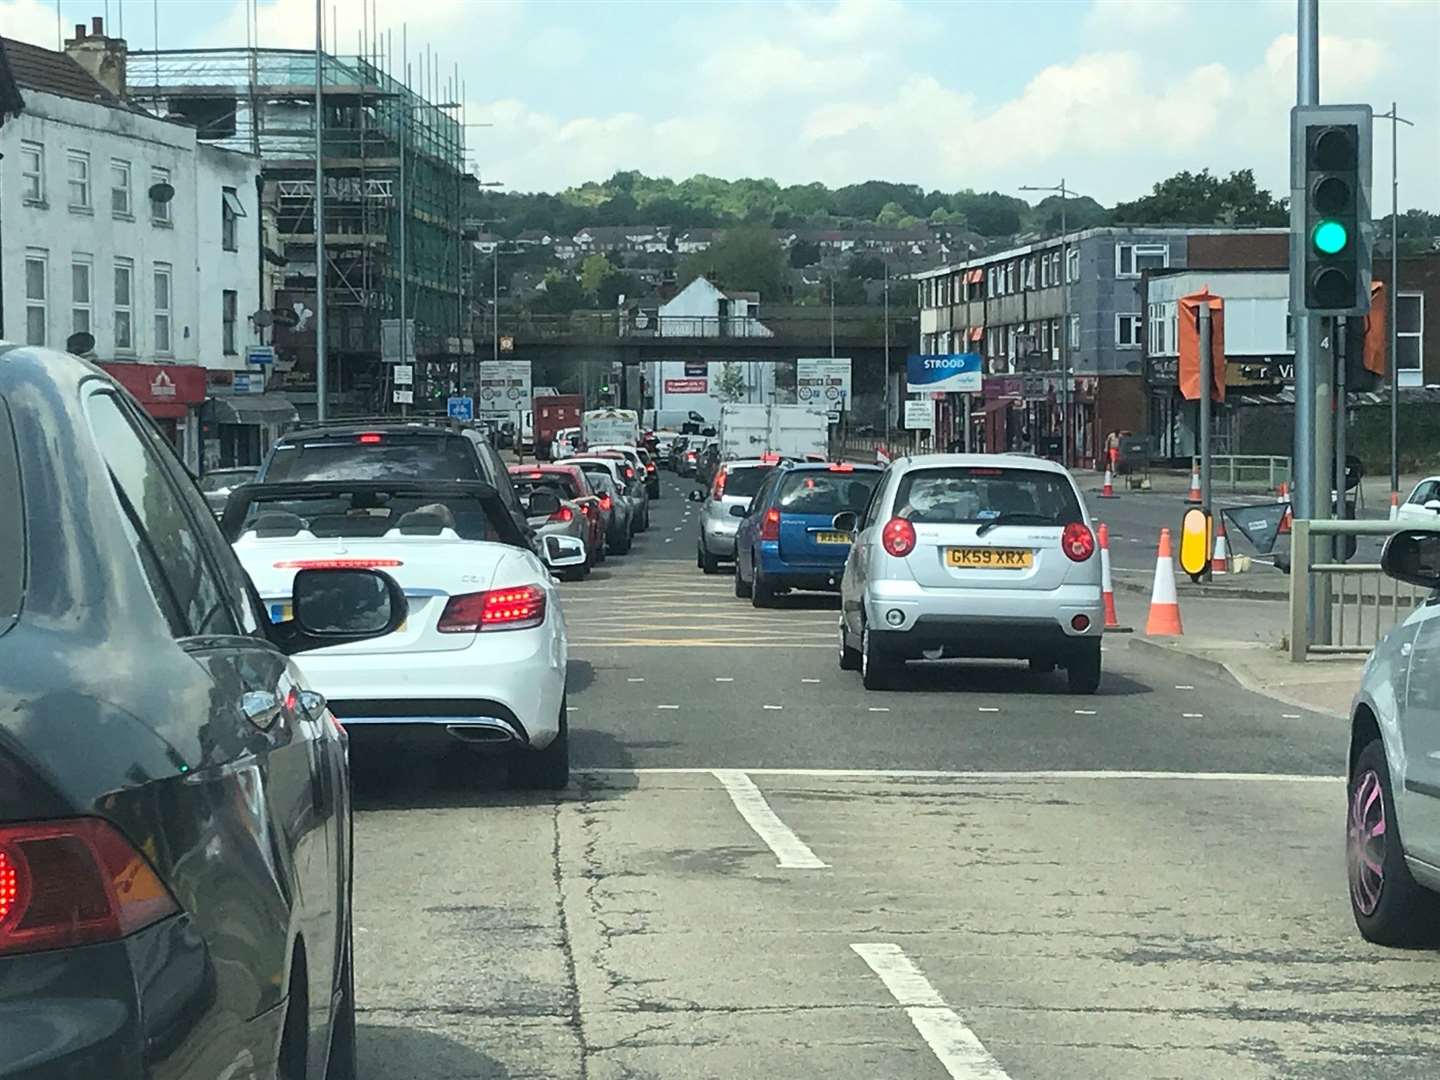 The peace and quiet on the roads came to an end around May 20. These cars in Strood are heading in the direction of a popular fast food restaurant...